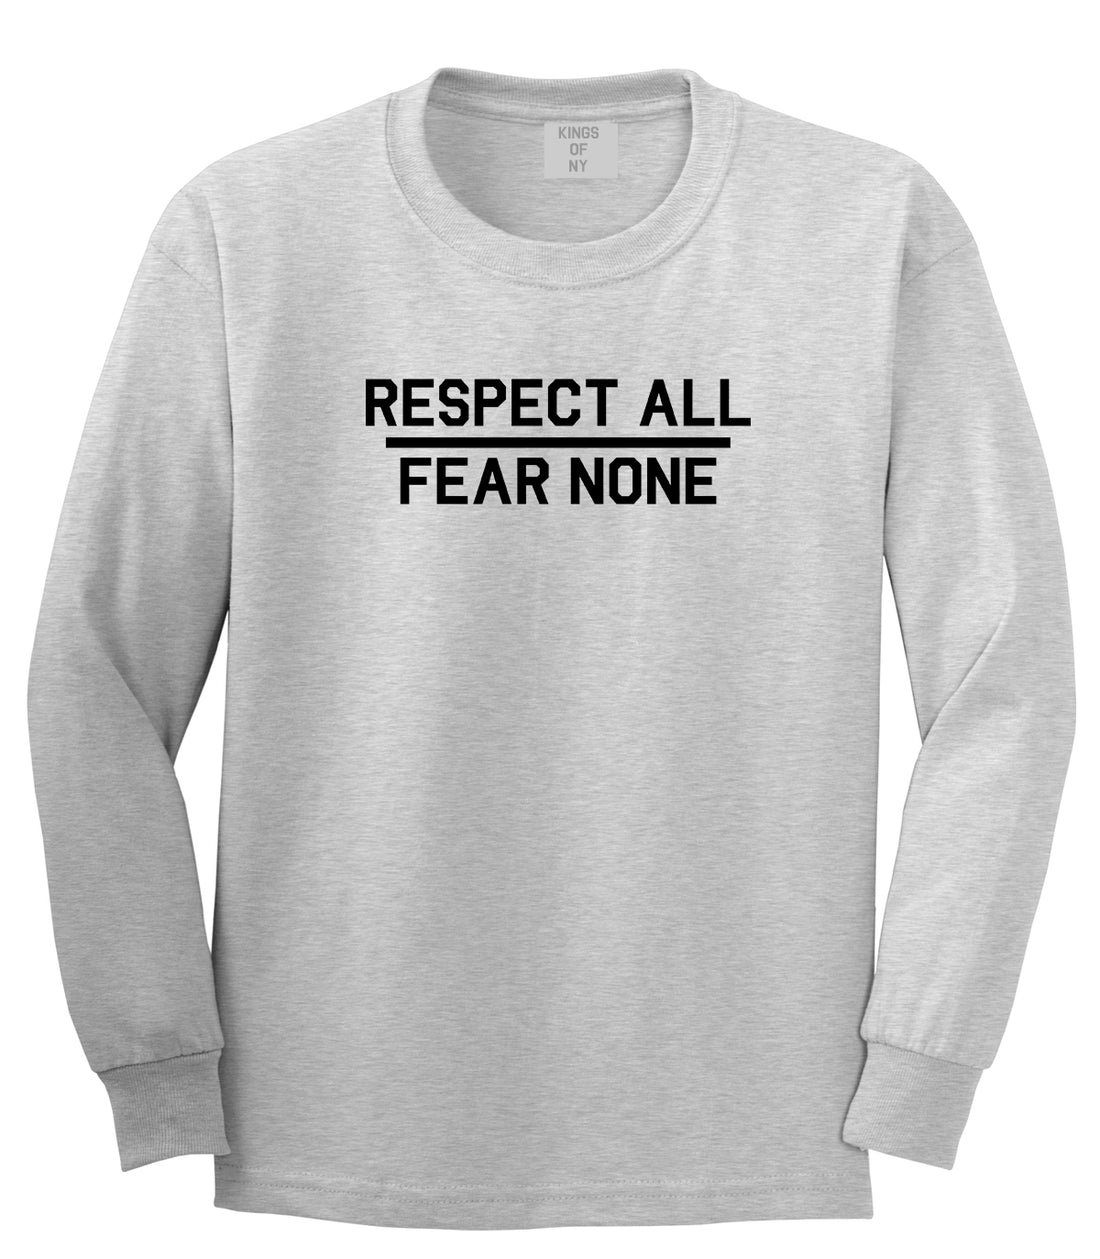 Respect All Fear None Mens Long Sleeve T-Shirt Grey by Kings Of NY